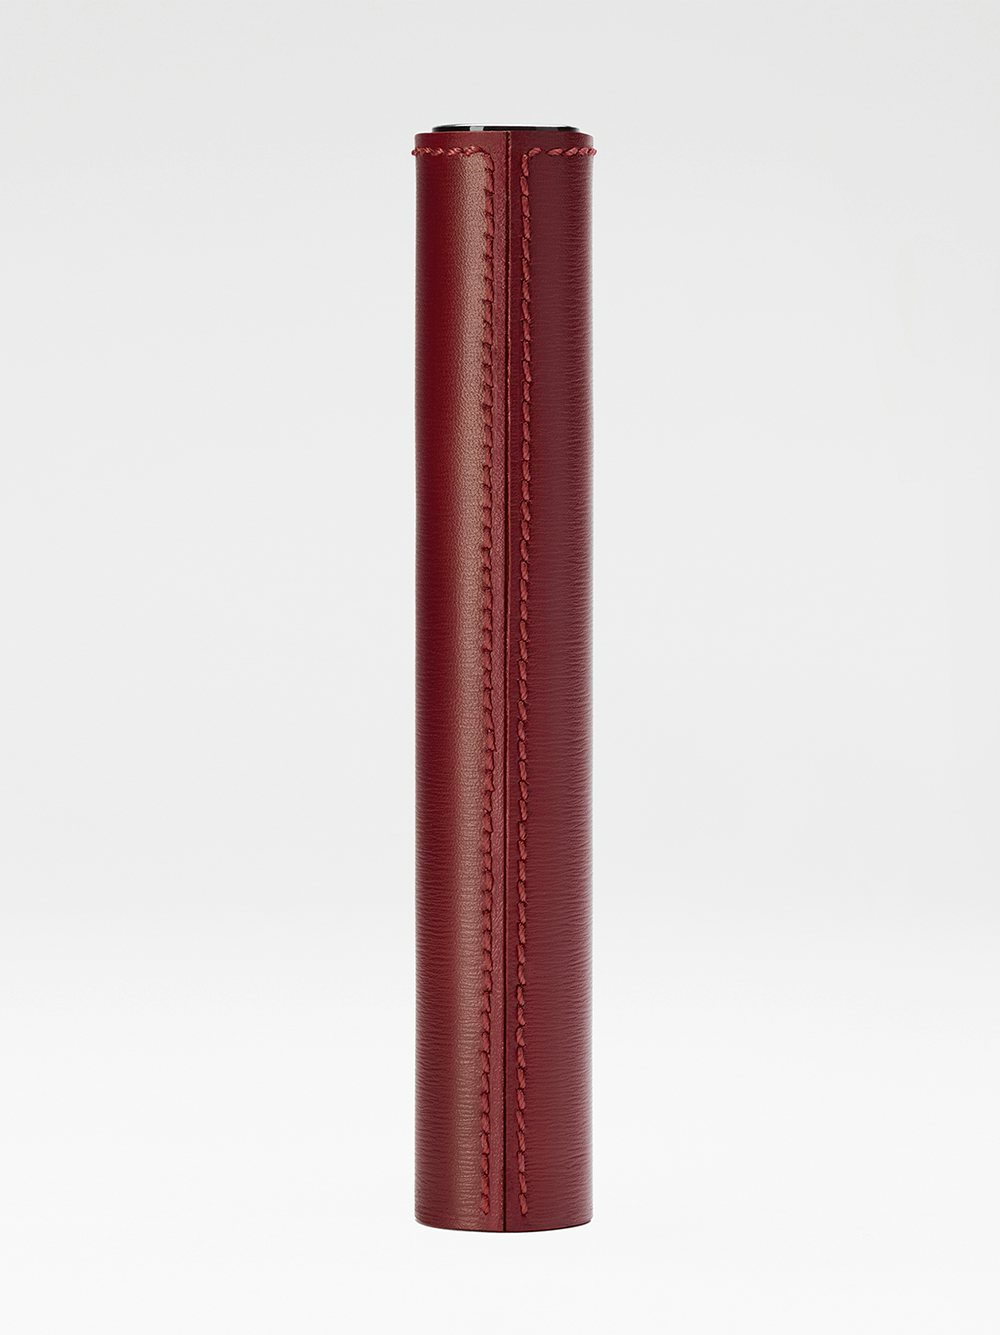 La bouche rouge Chocolate leather sleeve with stitches - back